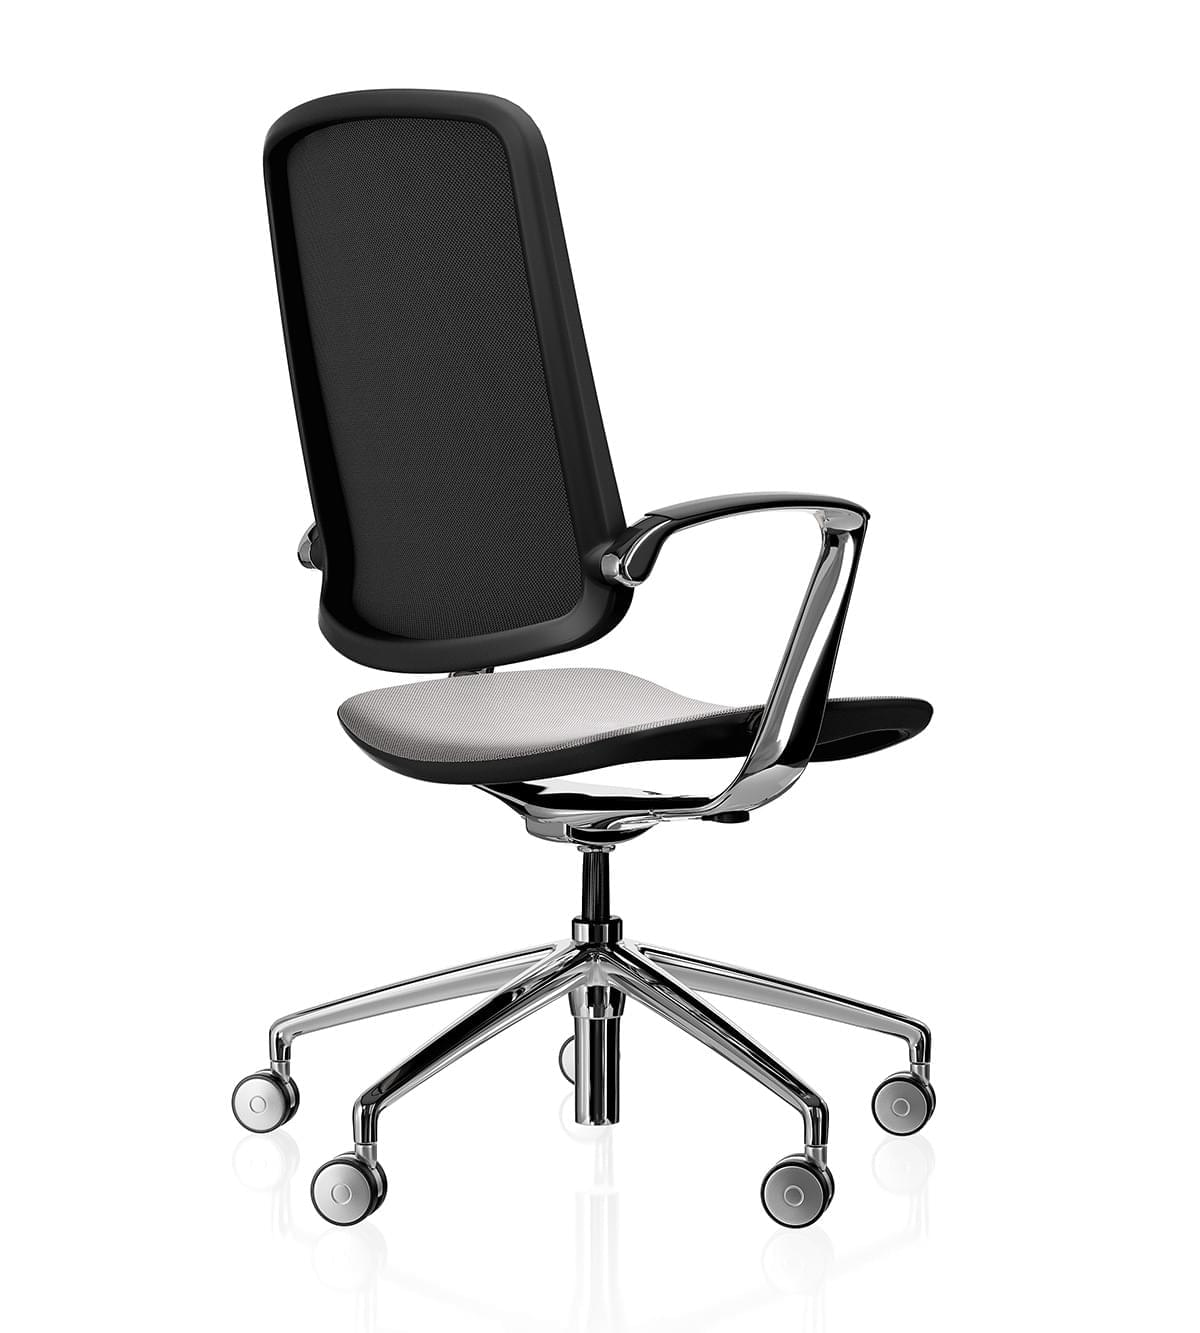 Trinetic Mesh Chair- Black frame polished 5 star base with silver castors